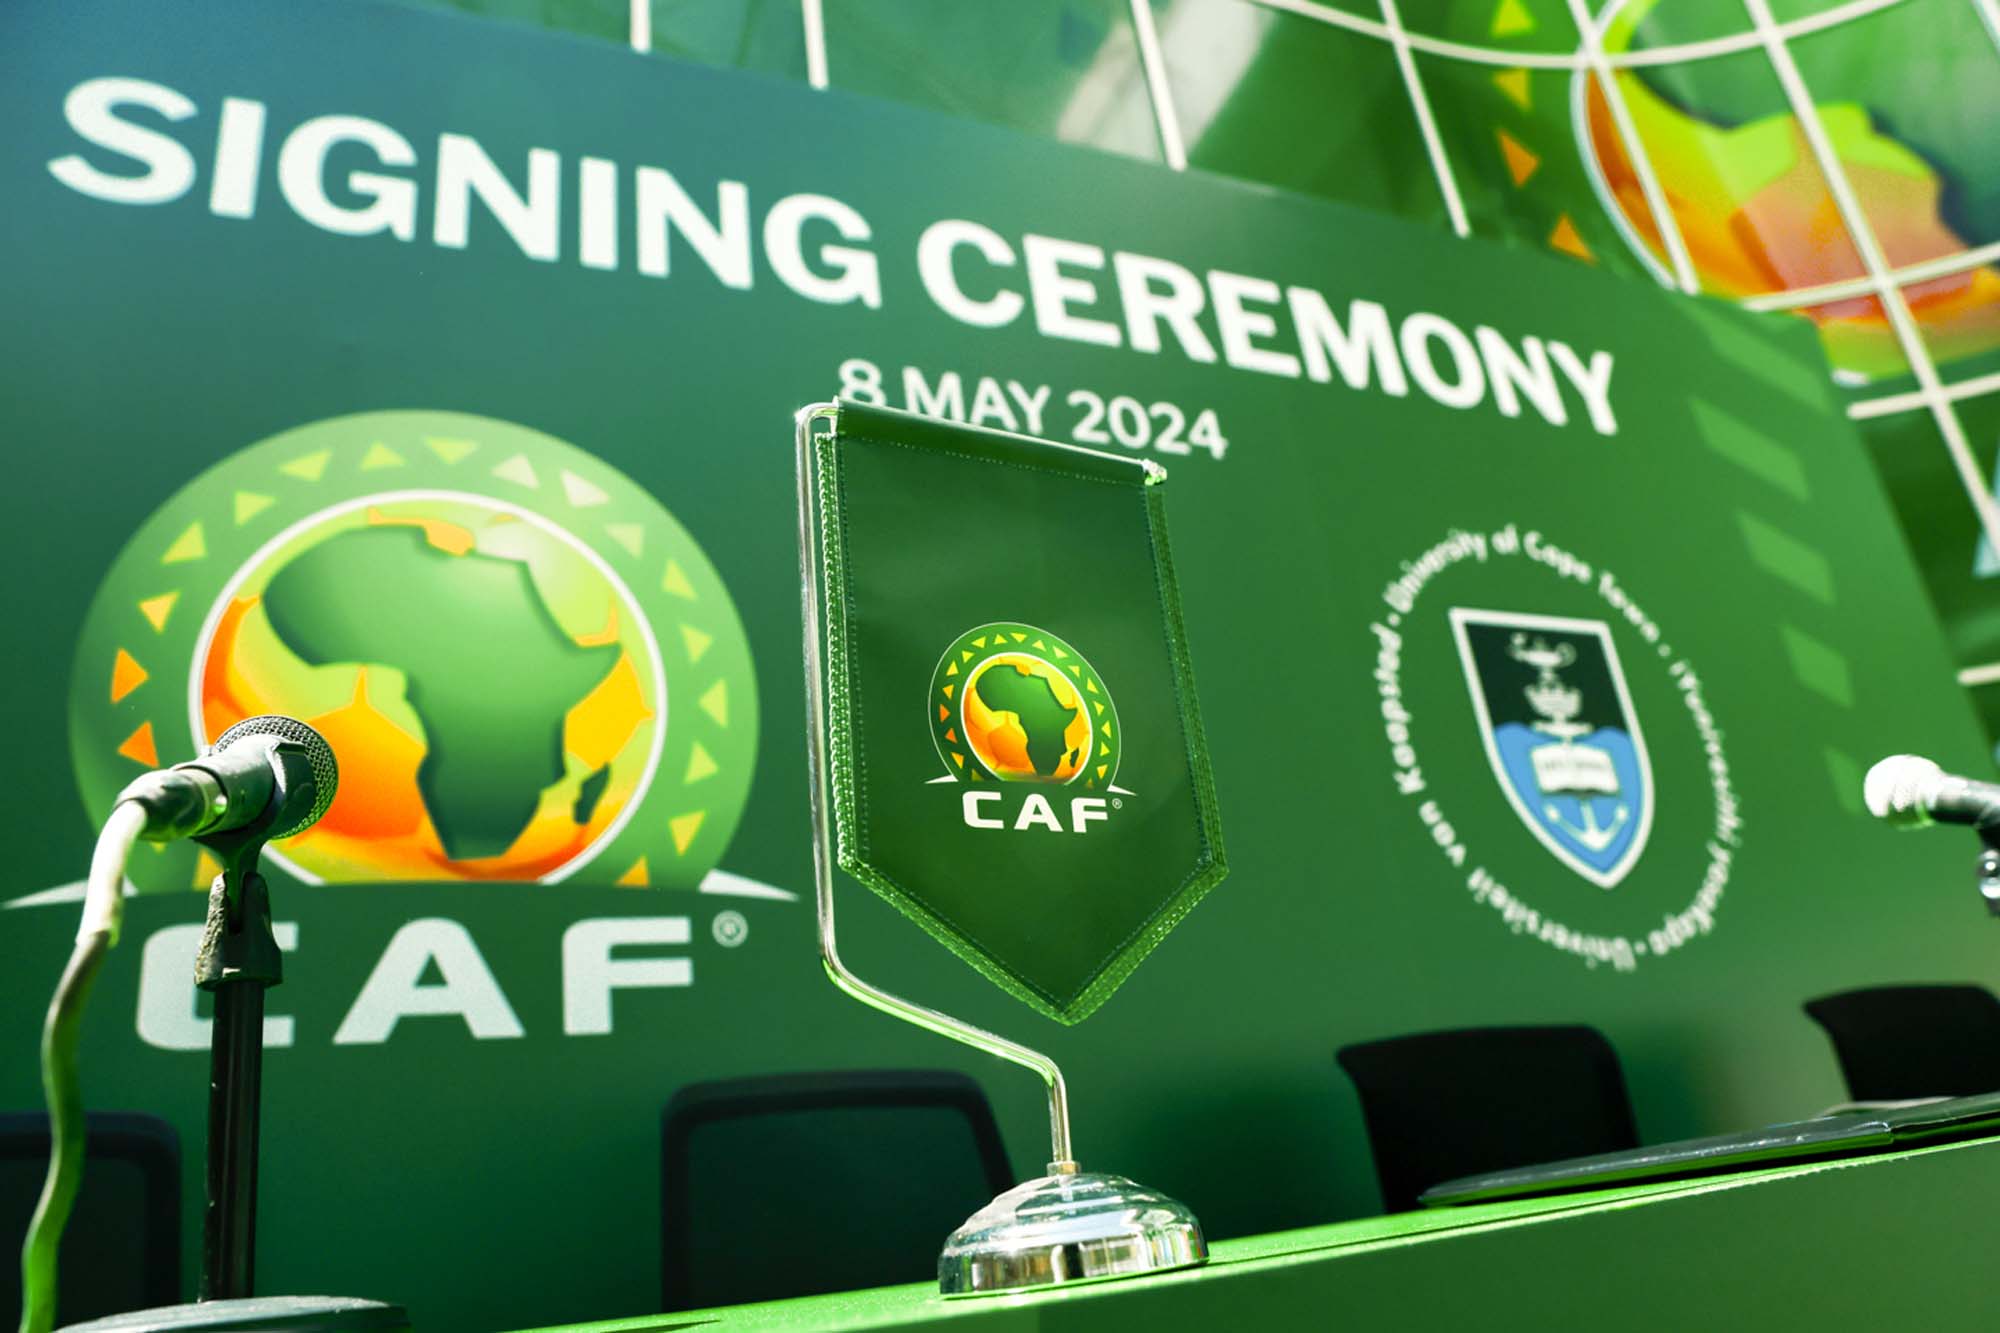 CAF and UCT branding at the signing ceremony in Cairo, Egypt.